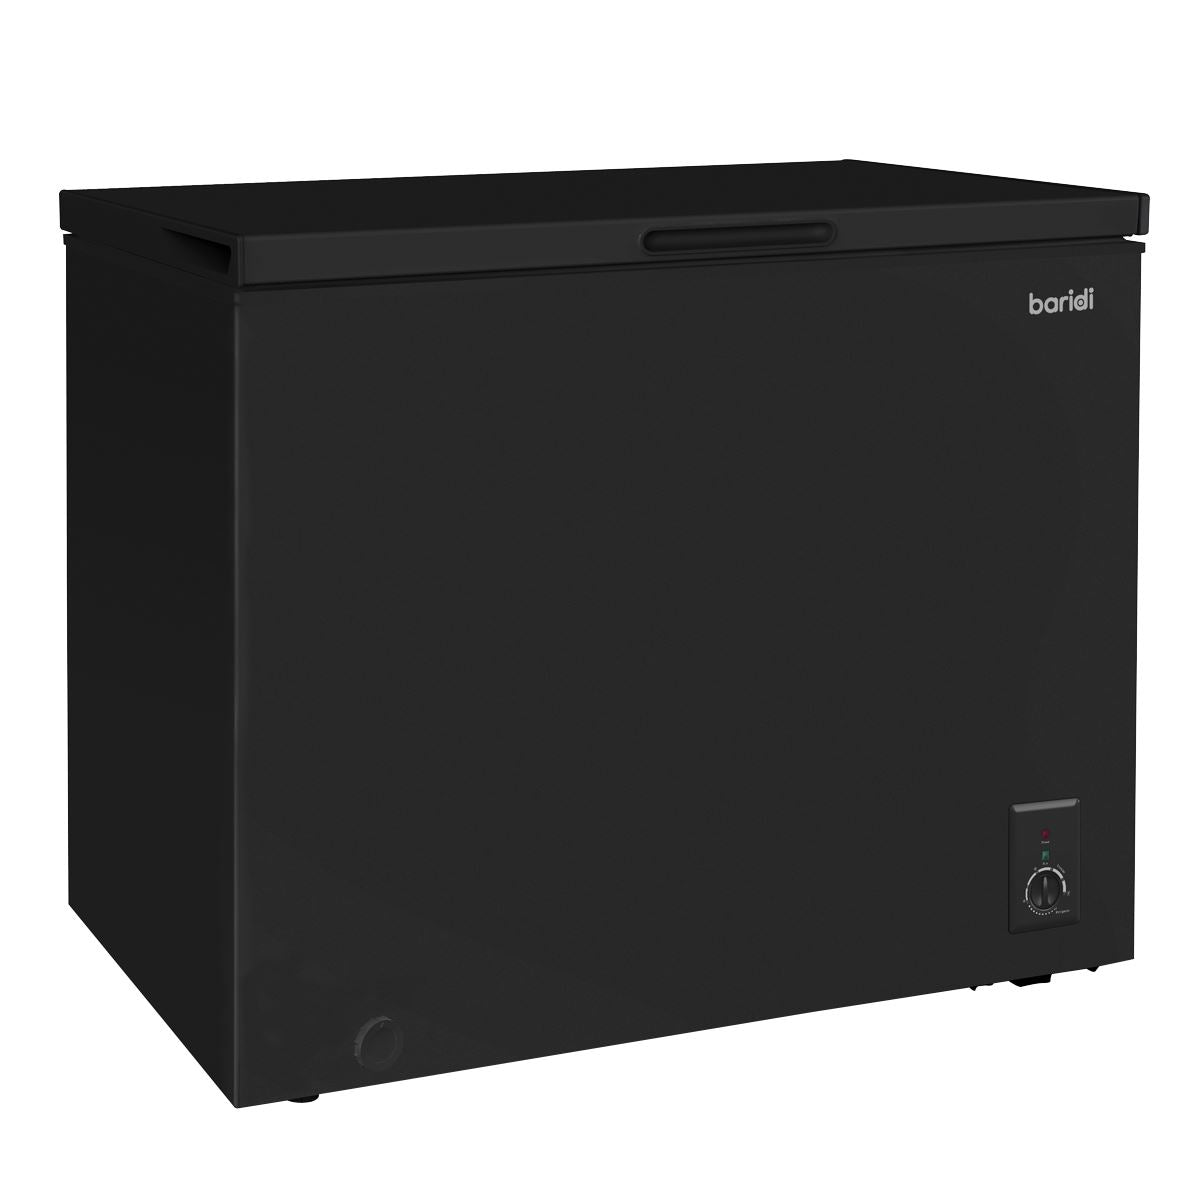 Baridi Freestanding Chest Freezer, 199L Capacity, Garages and Outbuilding Safe, -12 to -24°C Adjustable Thermostat with Refrigeration Mode, Black